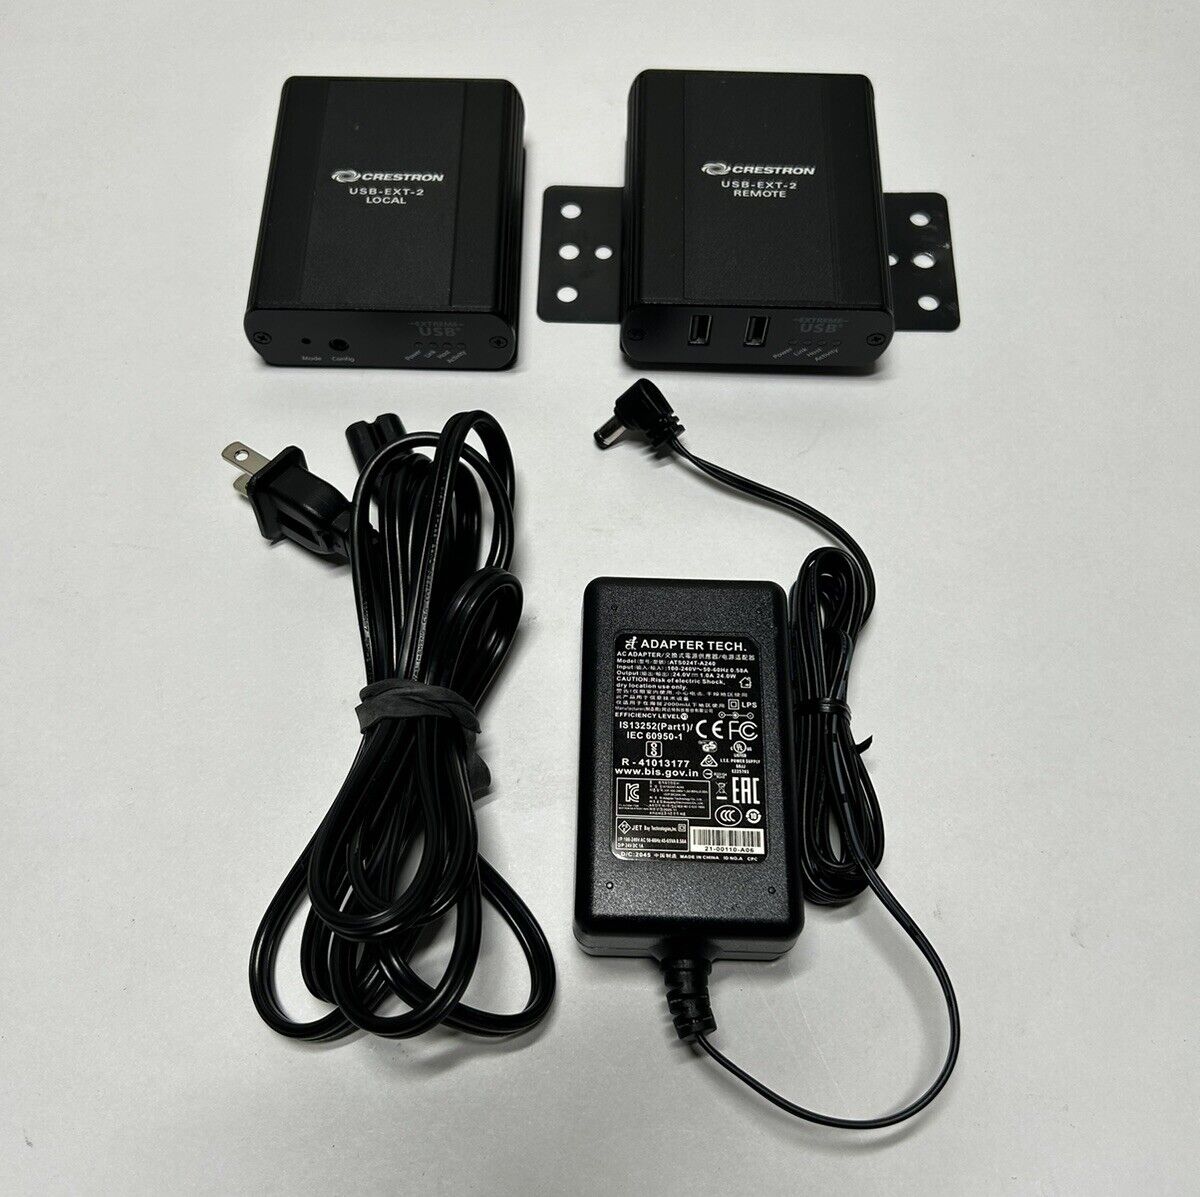 Crestron USB‑EXT‑2 REMOTE and LOCAL + Power Supply 6511093 6511094 - Tested